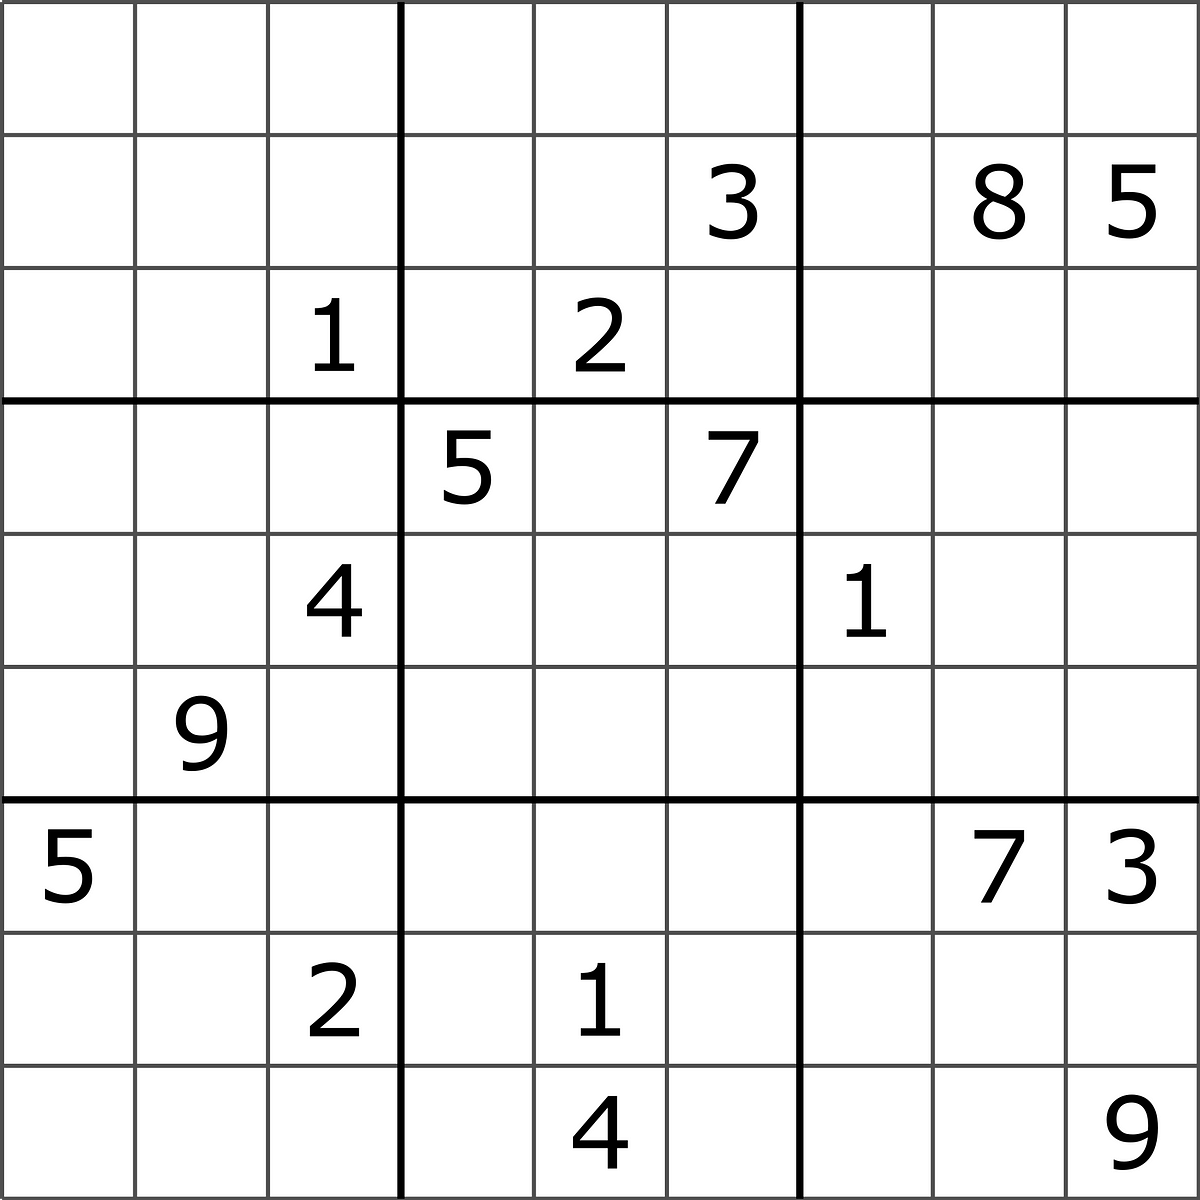 Solving Sudoku using a simple search algorithm, by Practicus AI